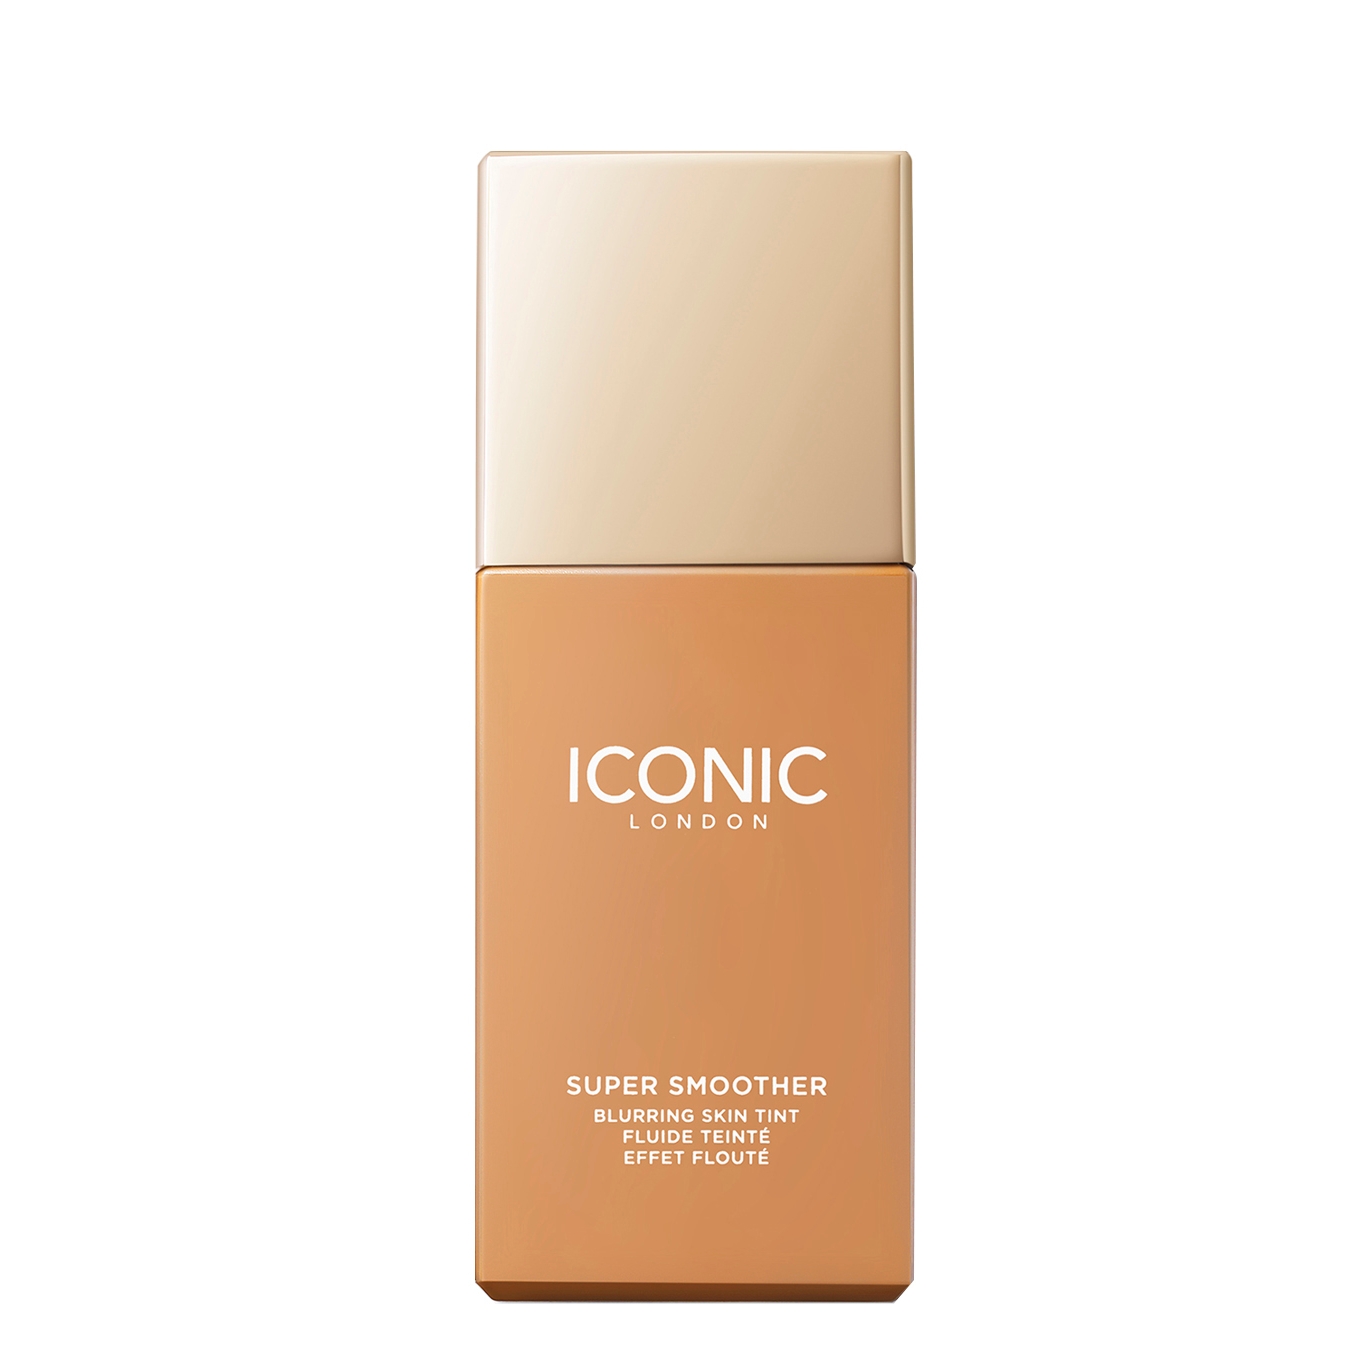 Iconic London Super Smoother Blurring Skin Tint - Colour Golden Medium